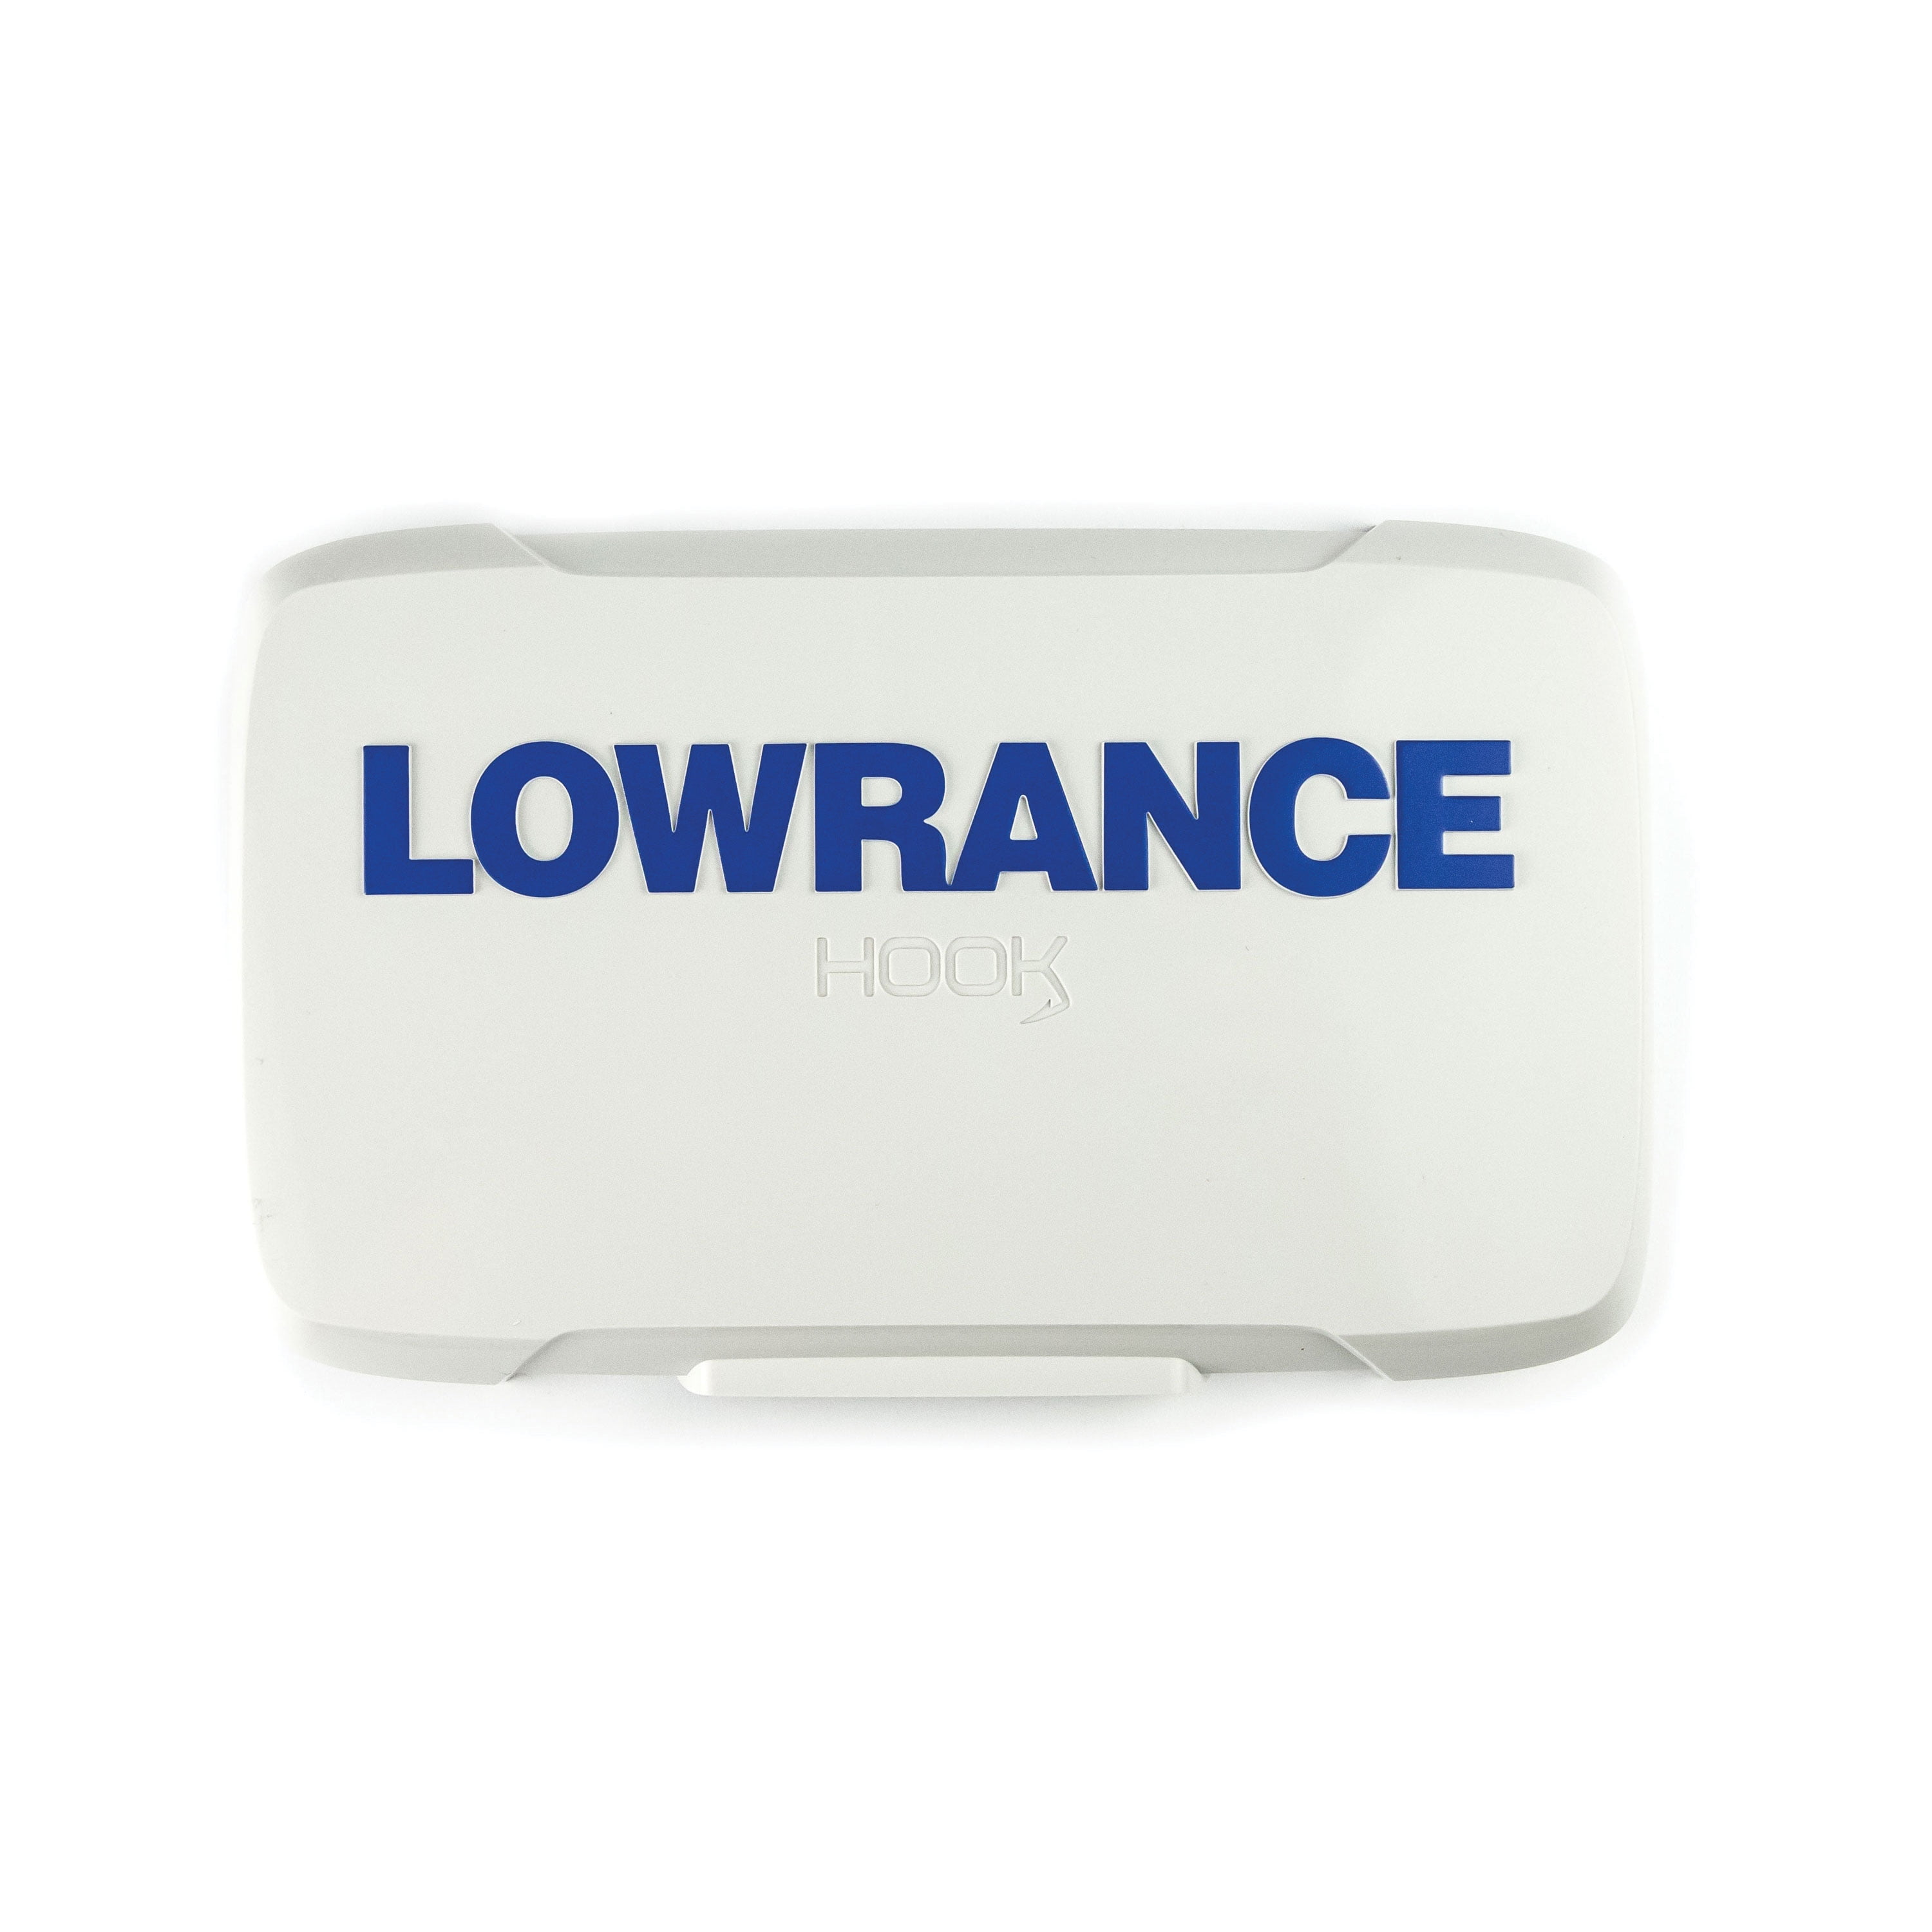 Lowrance Fish Finder HOOK2 5 Suncover - Fits all Lowrance HOOK2 5 Models 